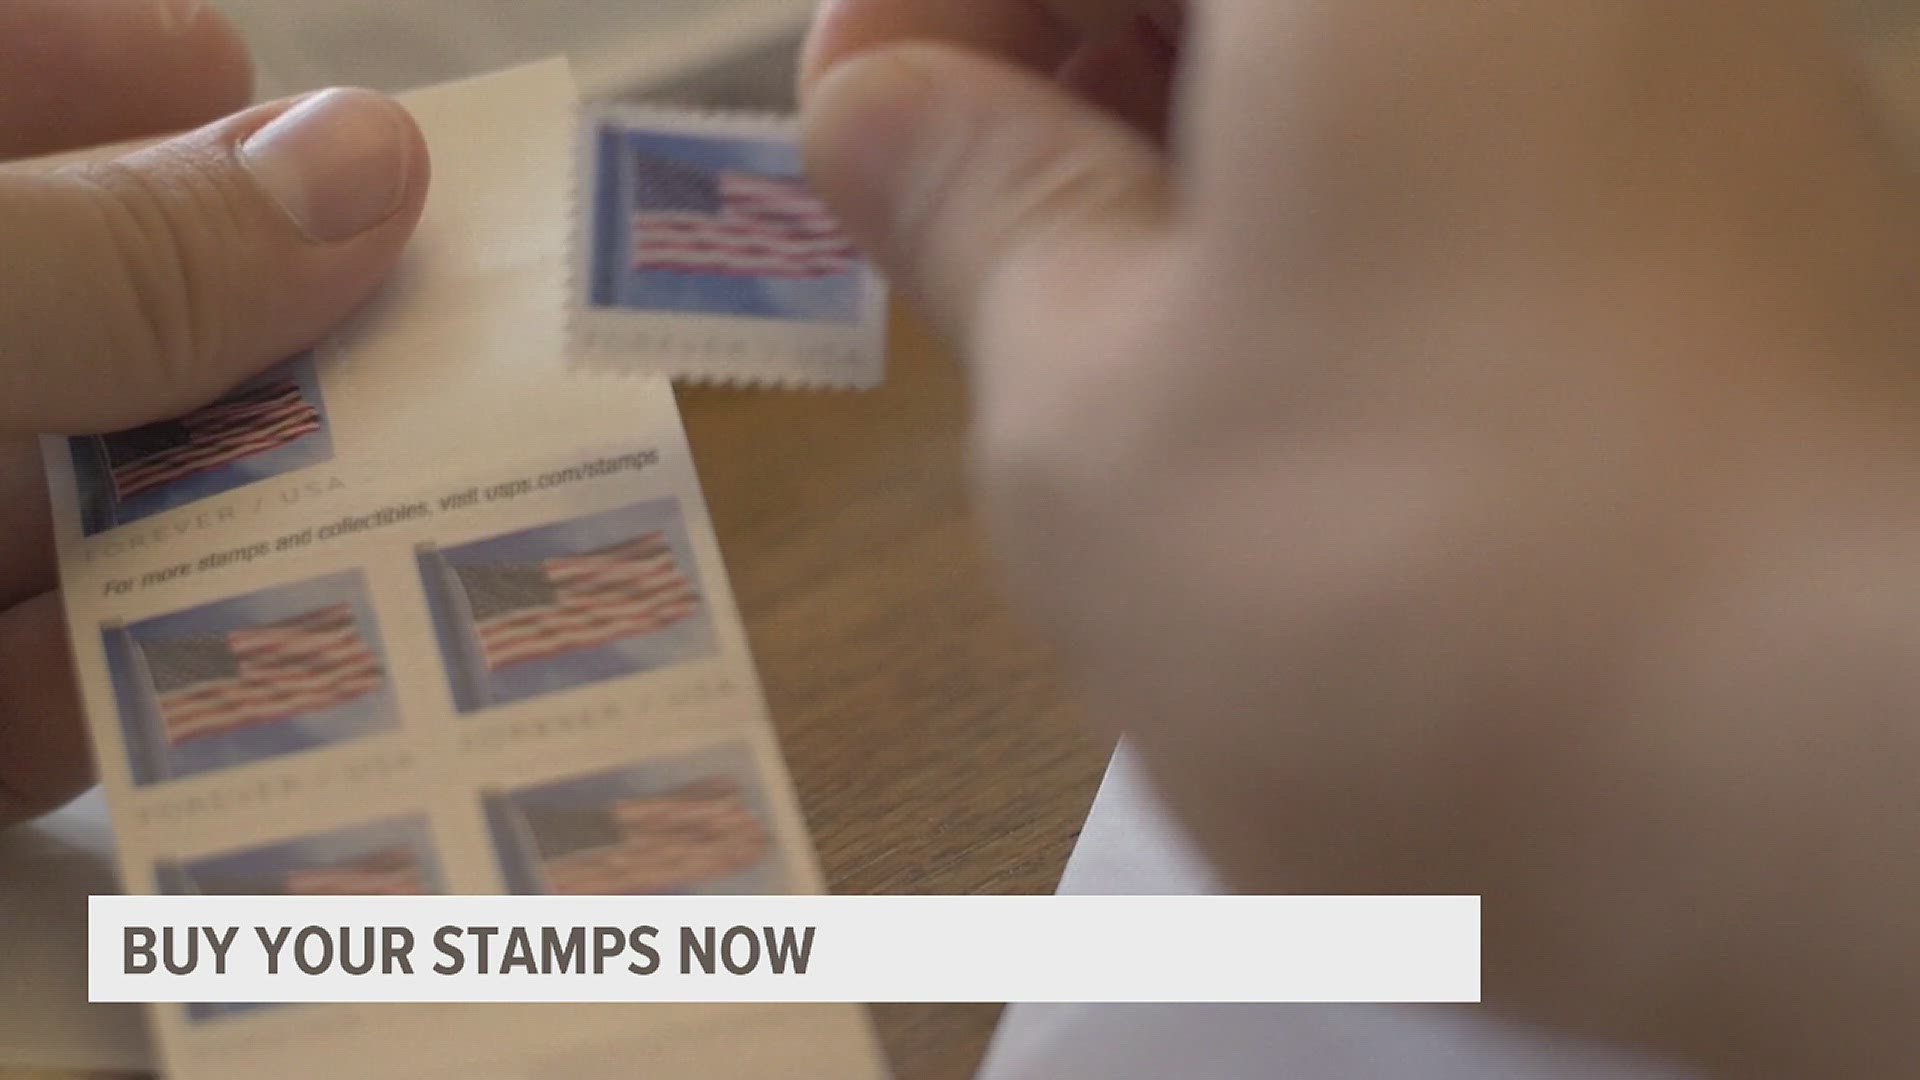 Stamp prices will increase by 5 cents.